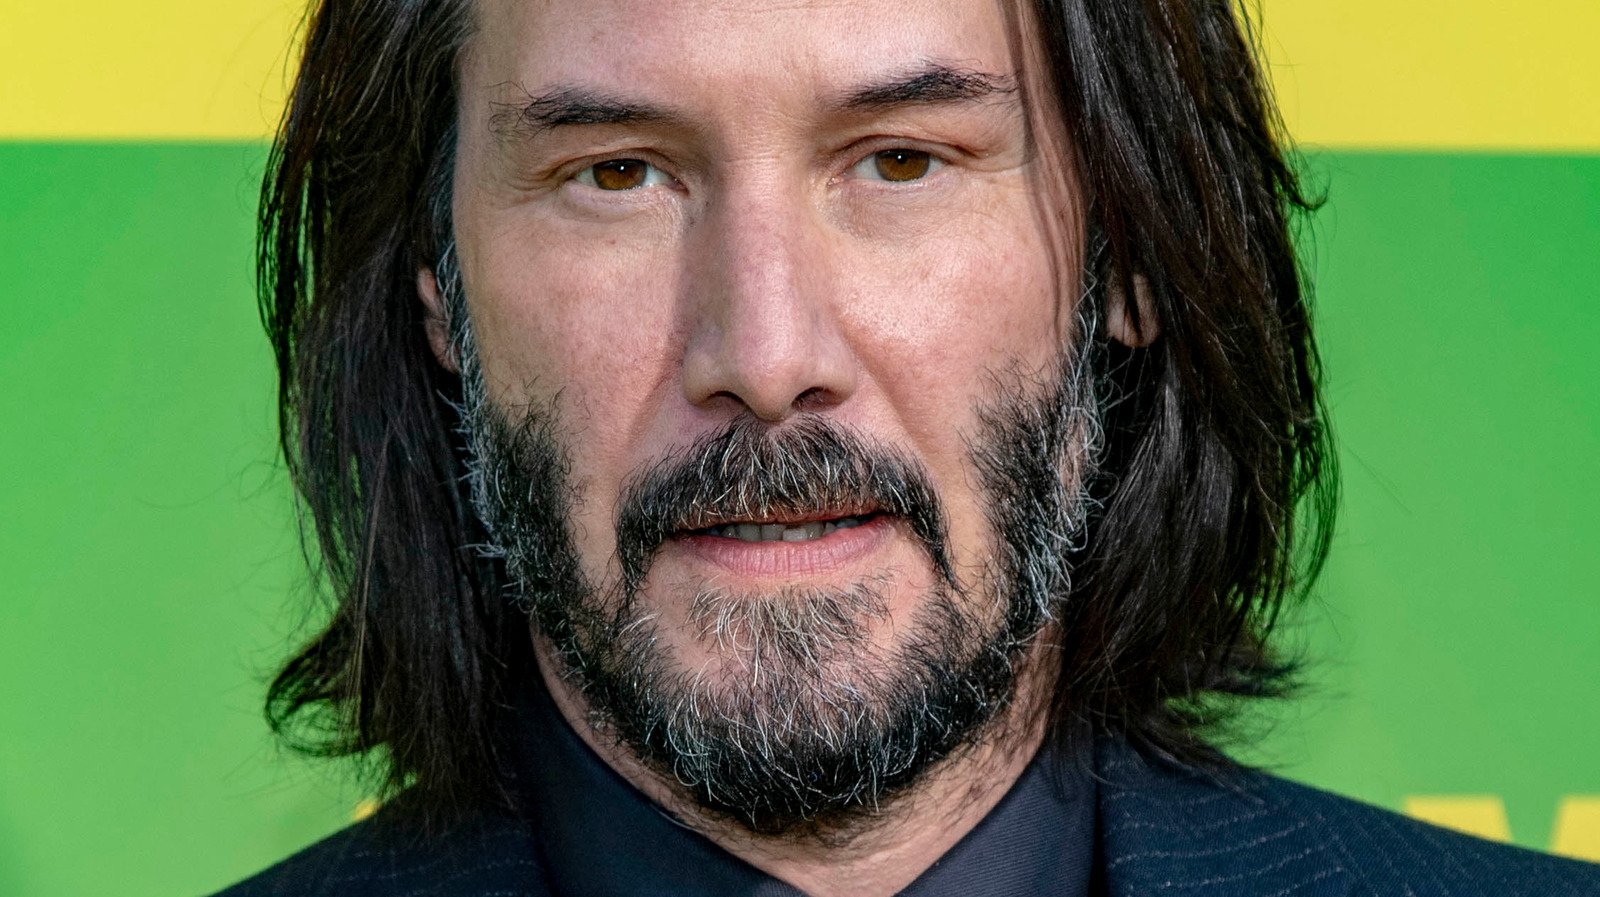 The One Keanu Reeves Sequel We're All Waiting For